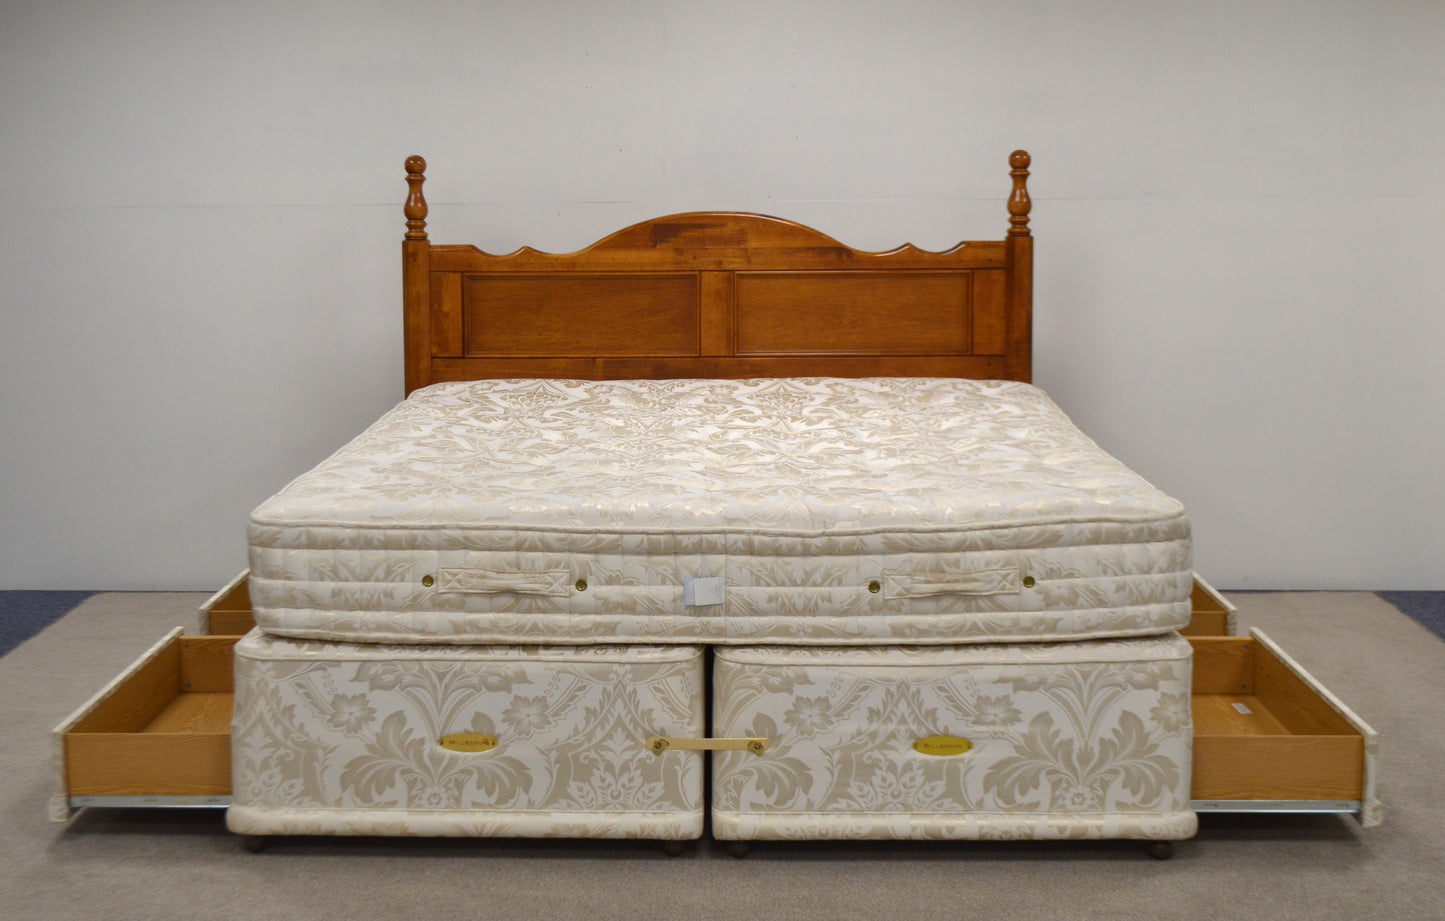 Millbrook King Size Bed and Matching Mattress with Willis & Gambier headboard